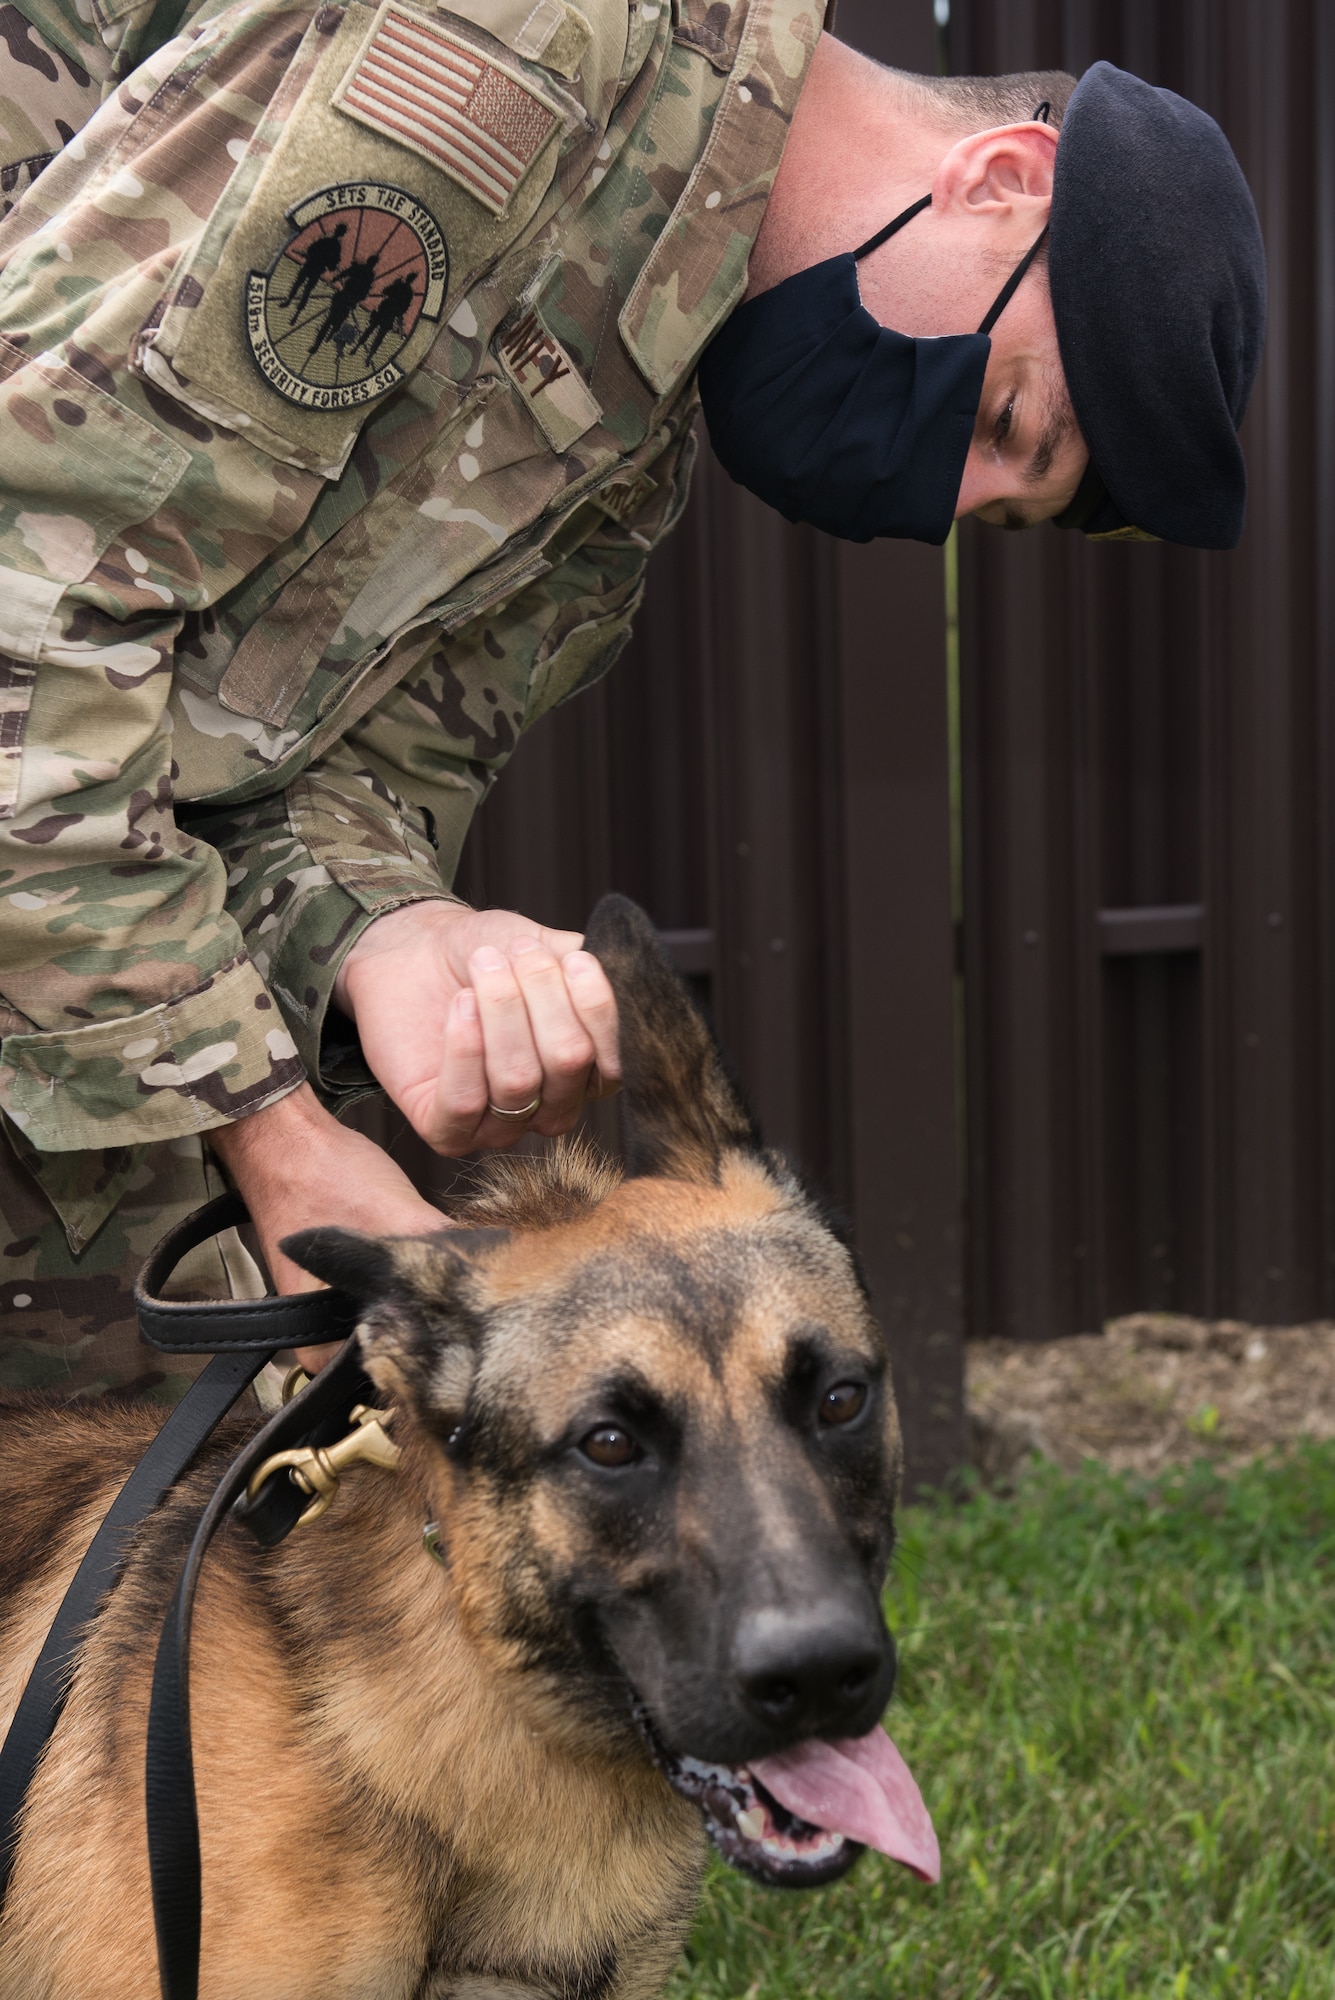 U.S. Air Force Tech. Sgt. Benjamin Vanney, 509th Security Forces Squadron Military Working Dog trainer, checks for an identification tattoo on MWD Oscar at Whiteman Air Force Base, Missouri, Aug. 7, 2020. Oscar became the newest and youngest MWD for Whiteman AFB after graduating the Military Working Dog Course at Lackland AFB, Texas. (U.S. Air Force photo by Airman 1st Class Christina Carter)